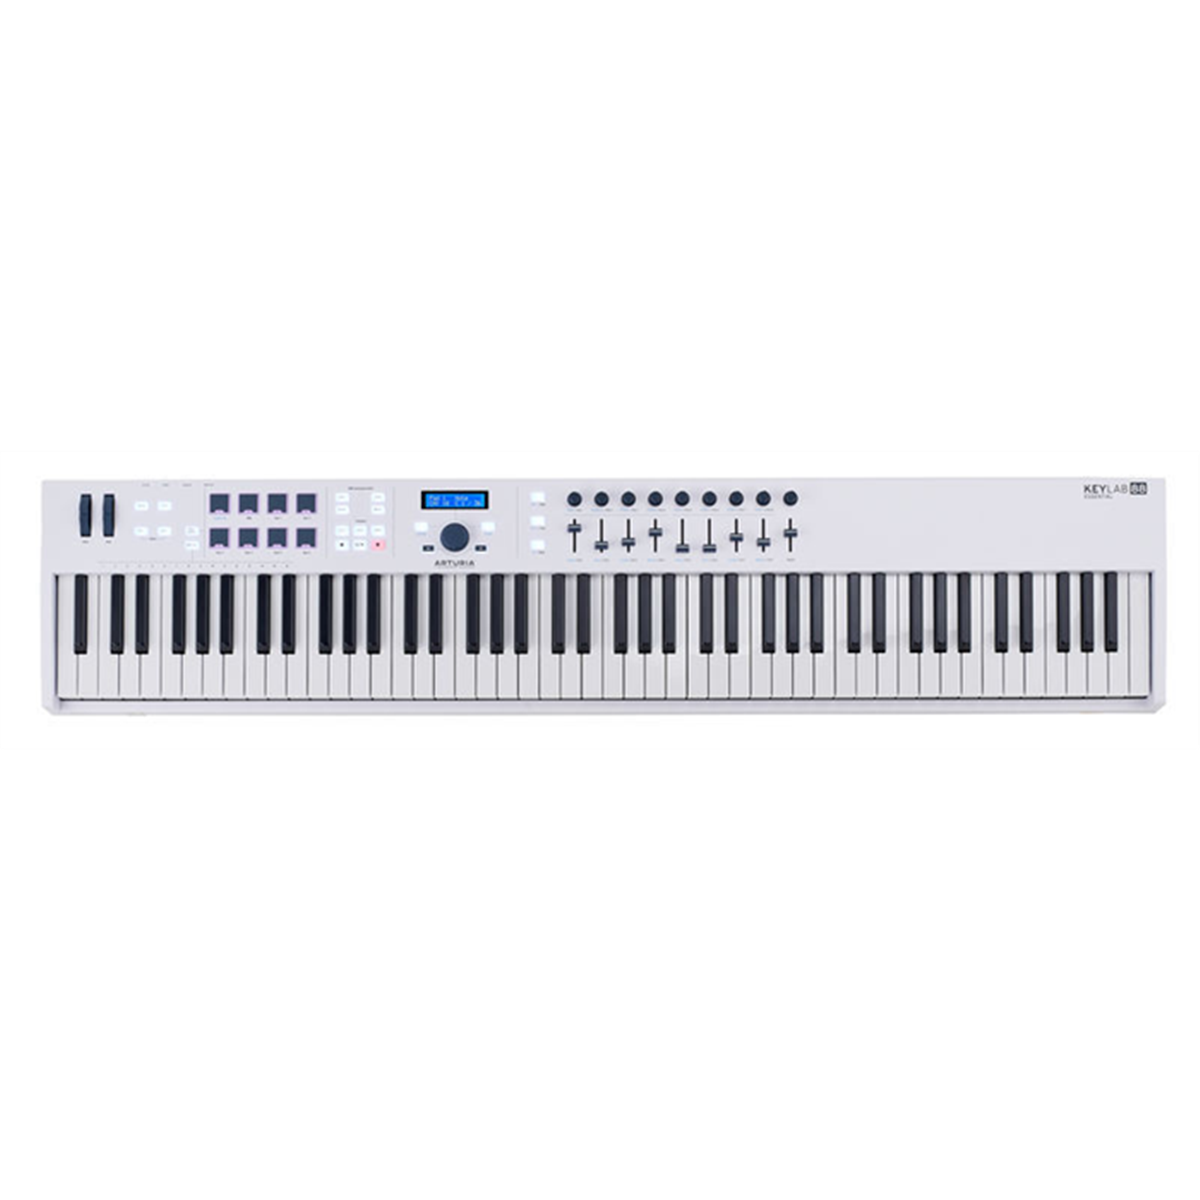 Stand Clavier Bois Stand & support clavier Arturia